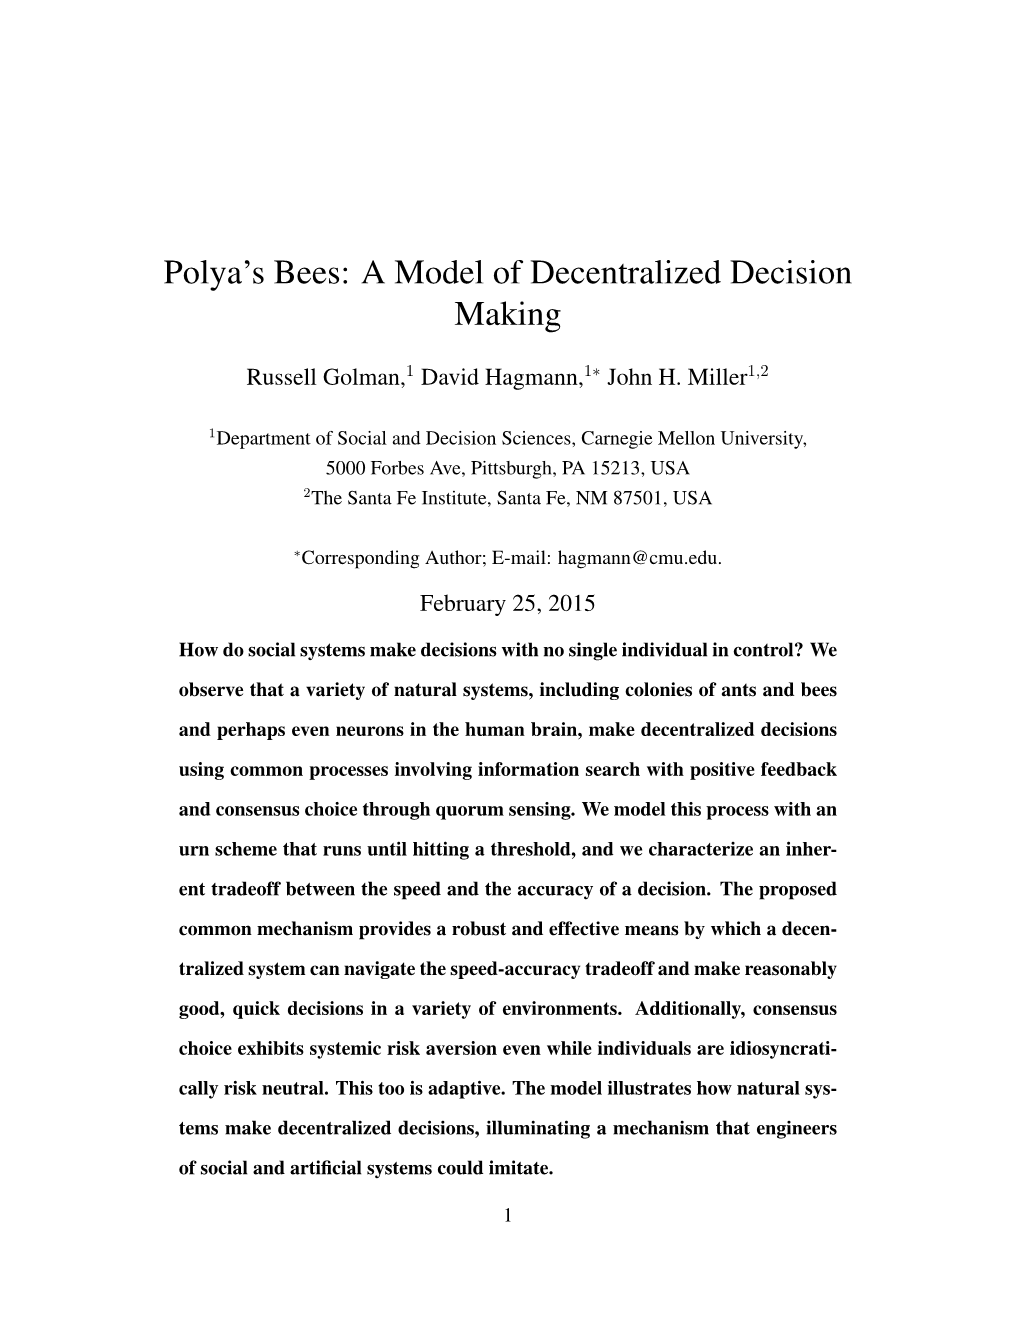 Polya's Bees: a Model of Decentralized Decision Making